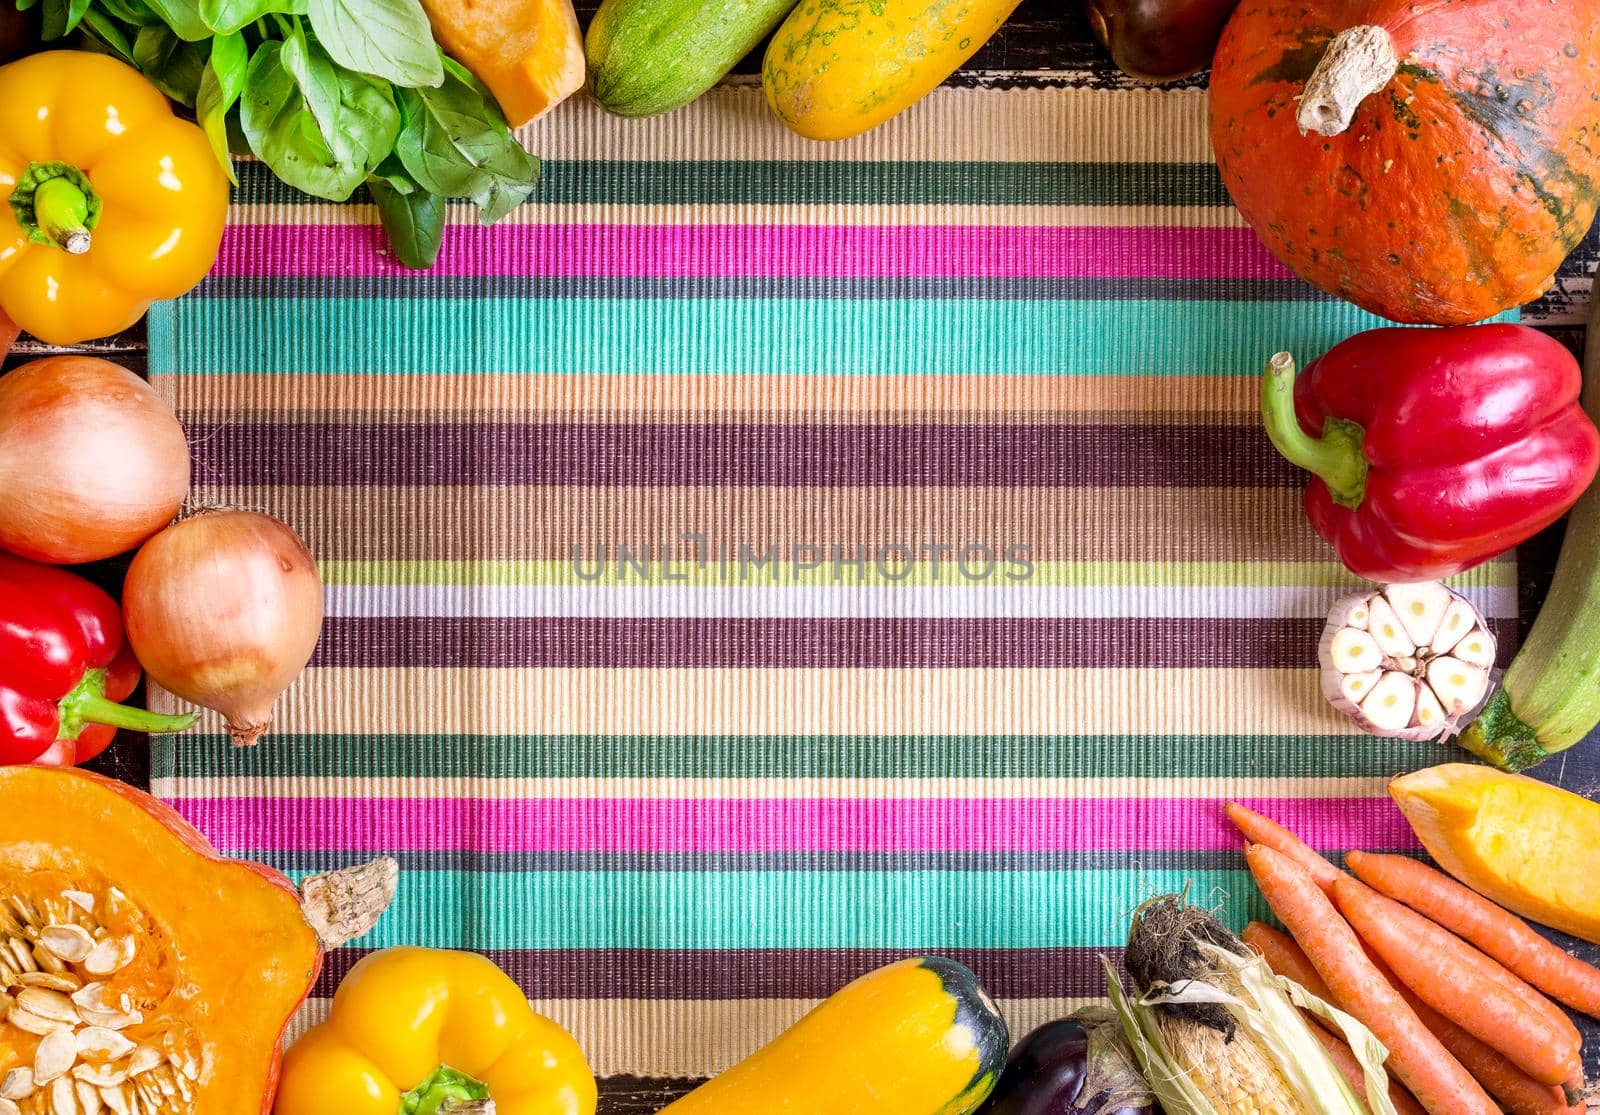 Fresh vegetables on a colorful striped kitchen towel and old rustic dark textured table. Autumn background. Healthy eating frame. Sliced pumpkin, bell peppers, carrots, onions, cut garlic, tomatoes, rucola and basil. Top view. Space for text